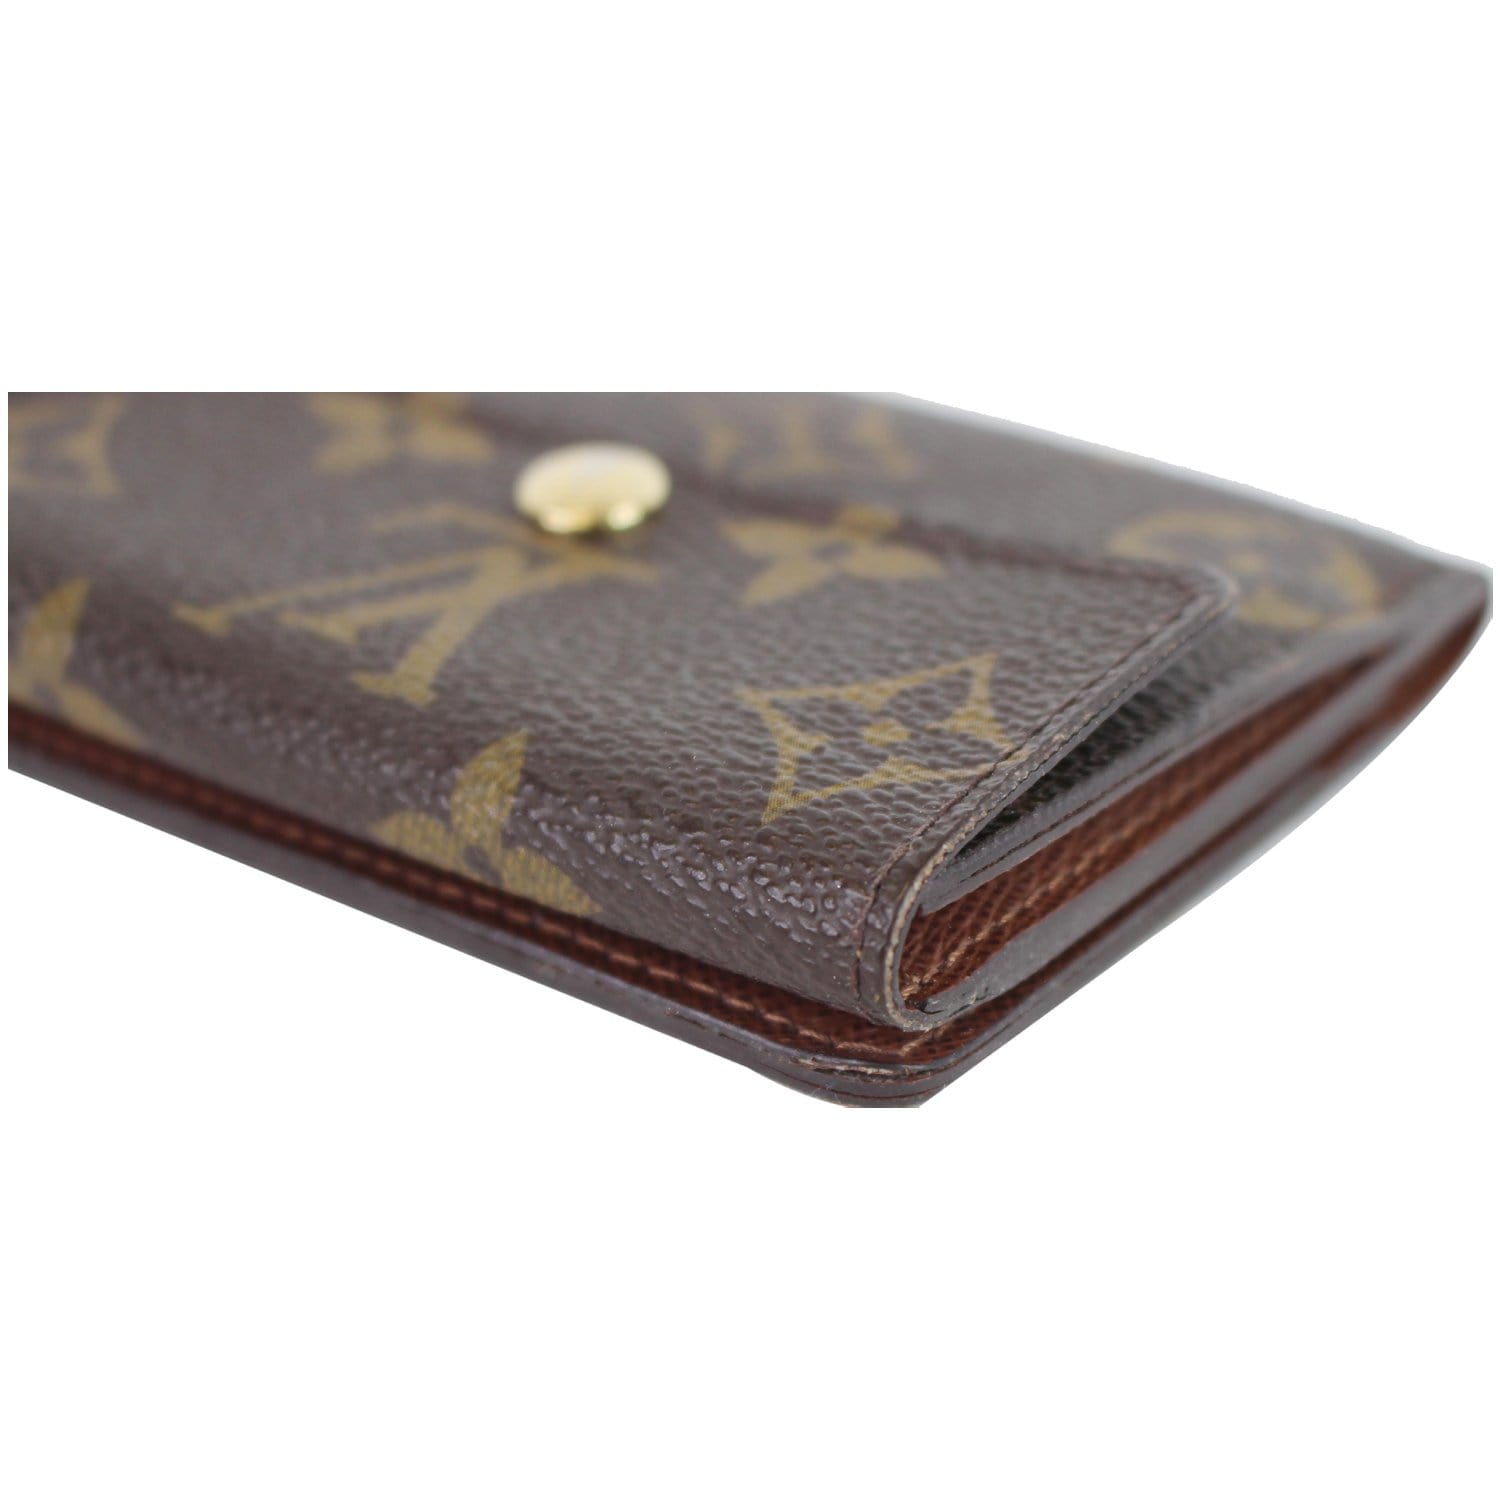 LOUIS VUITTON LUDLOW WALLET  Best mini wallet or card holder! Price,  overview, and what fits 